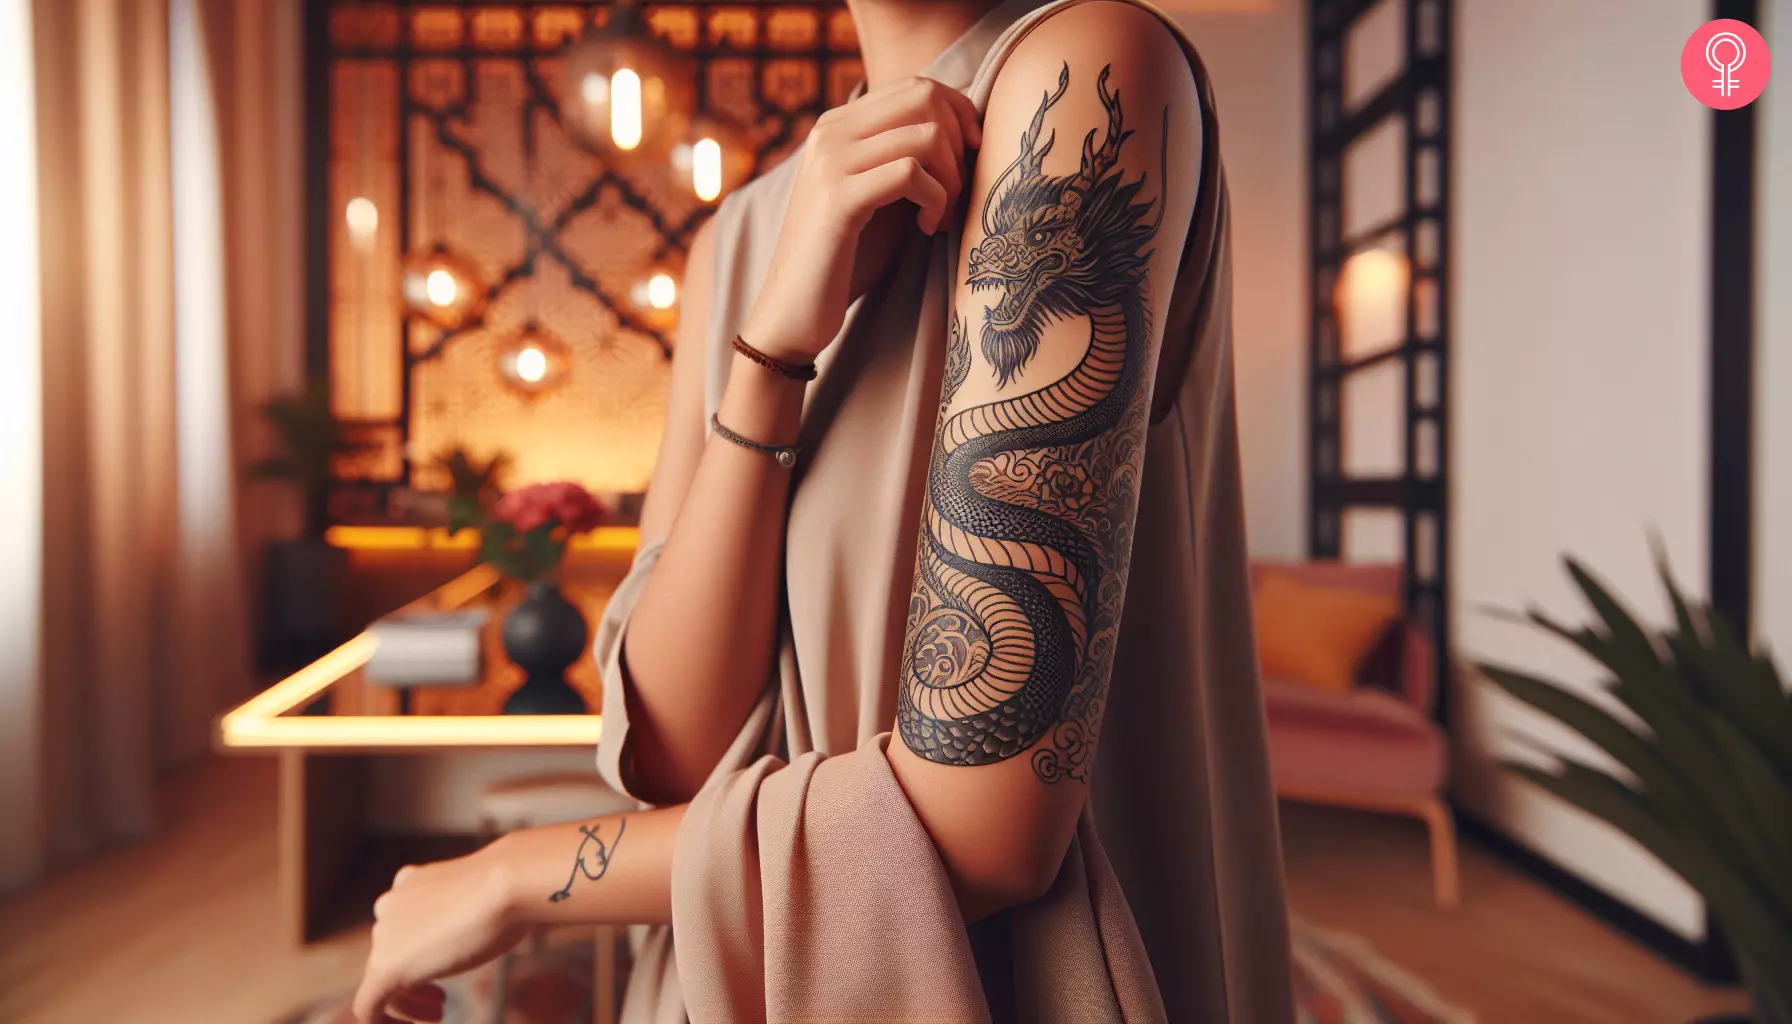 A coiled black dragon tattoo with flowers on the arm of a woman